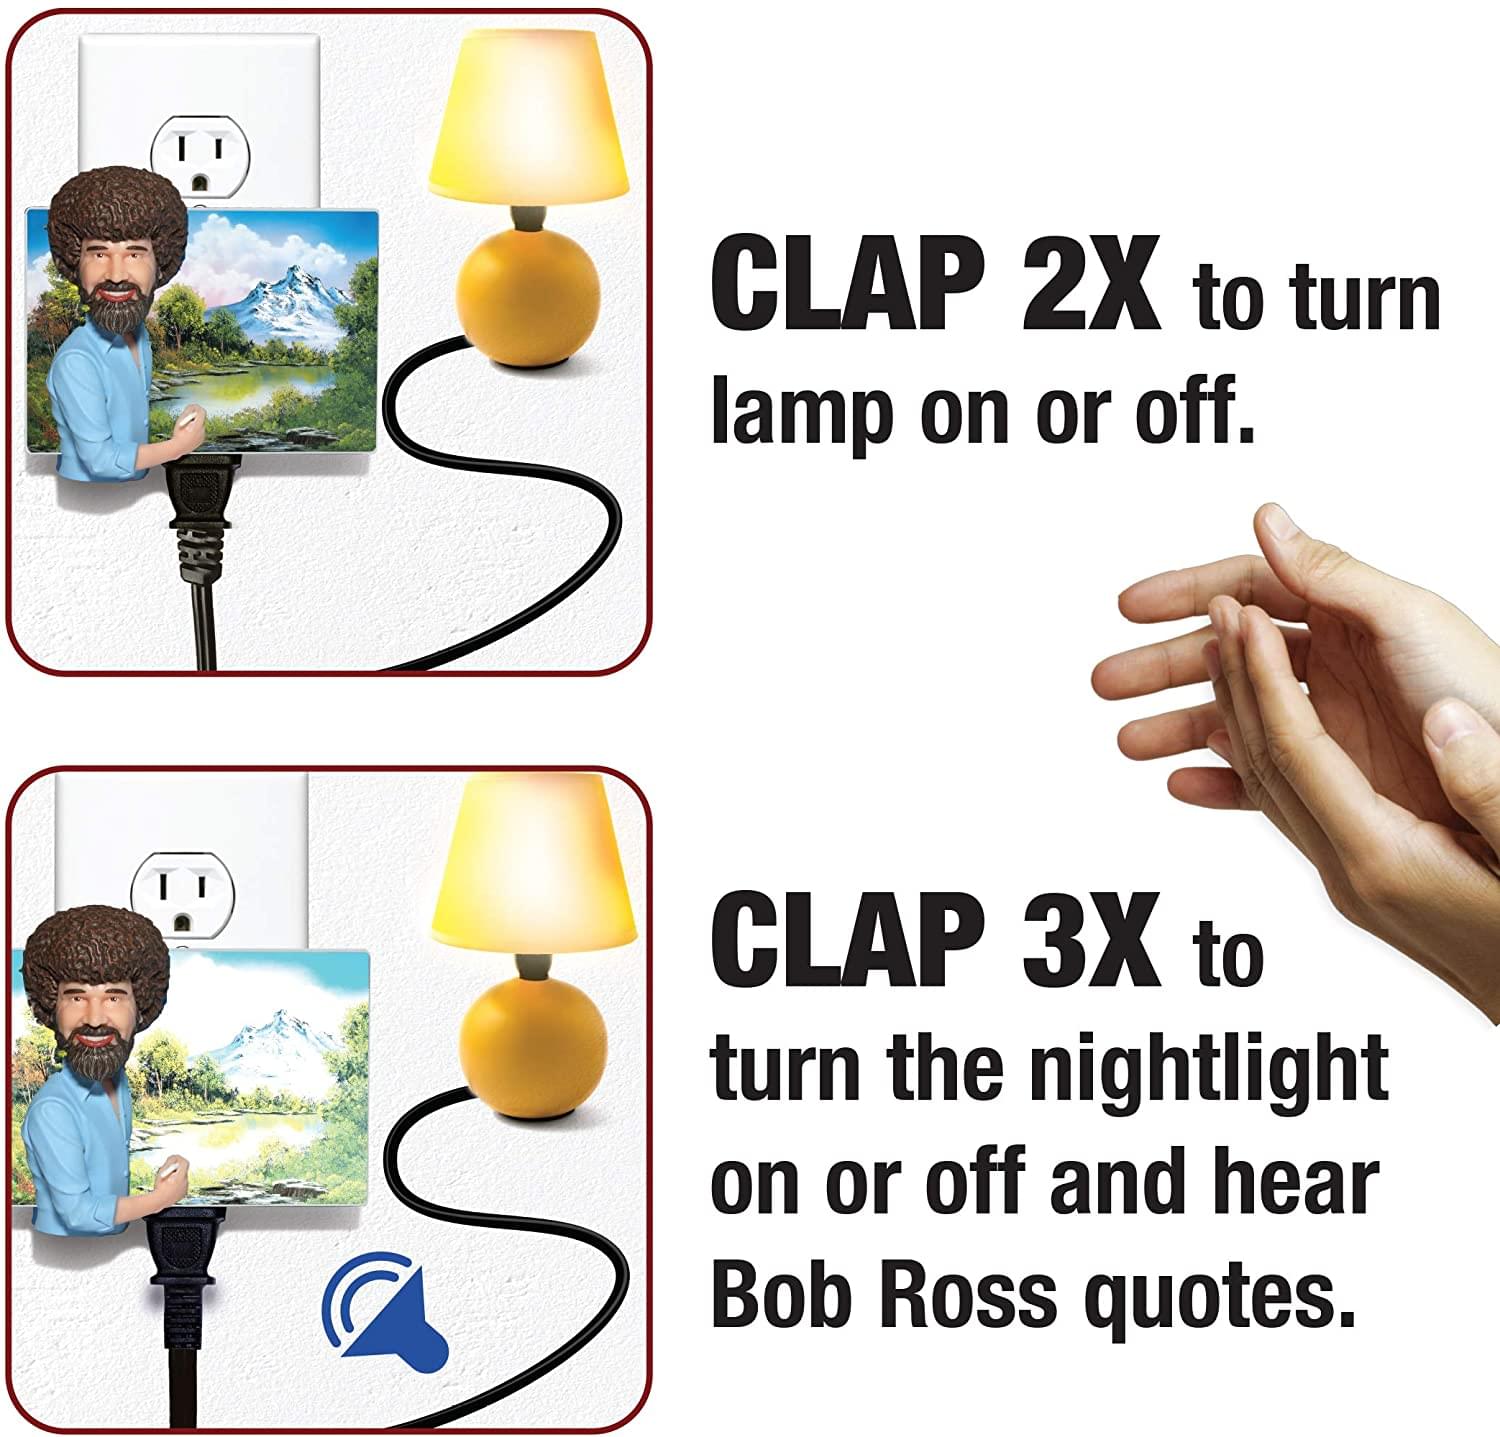 The Clapper sound activate on/off switch for Lamps, Lights and Appliances